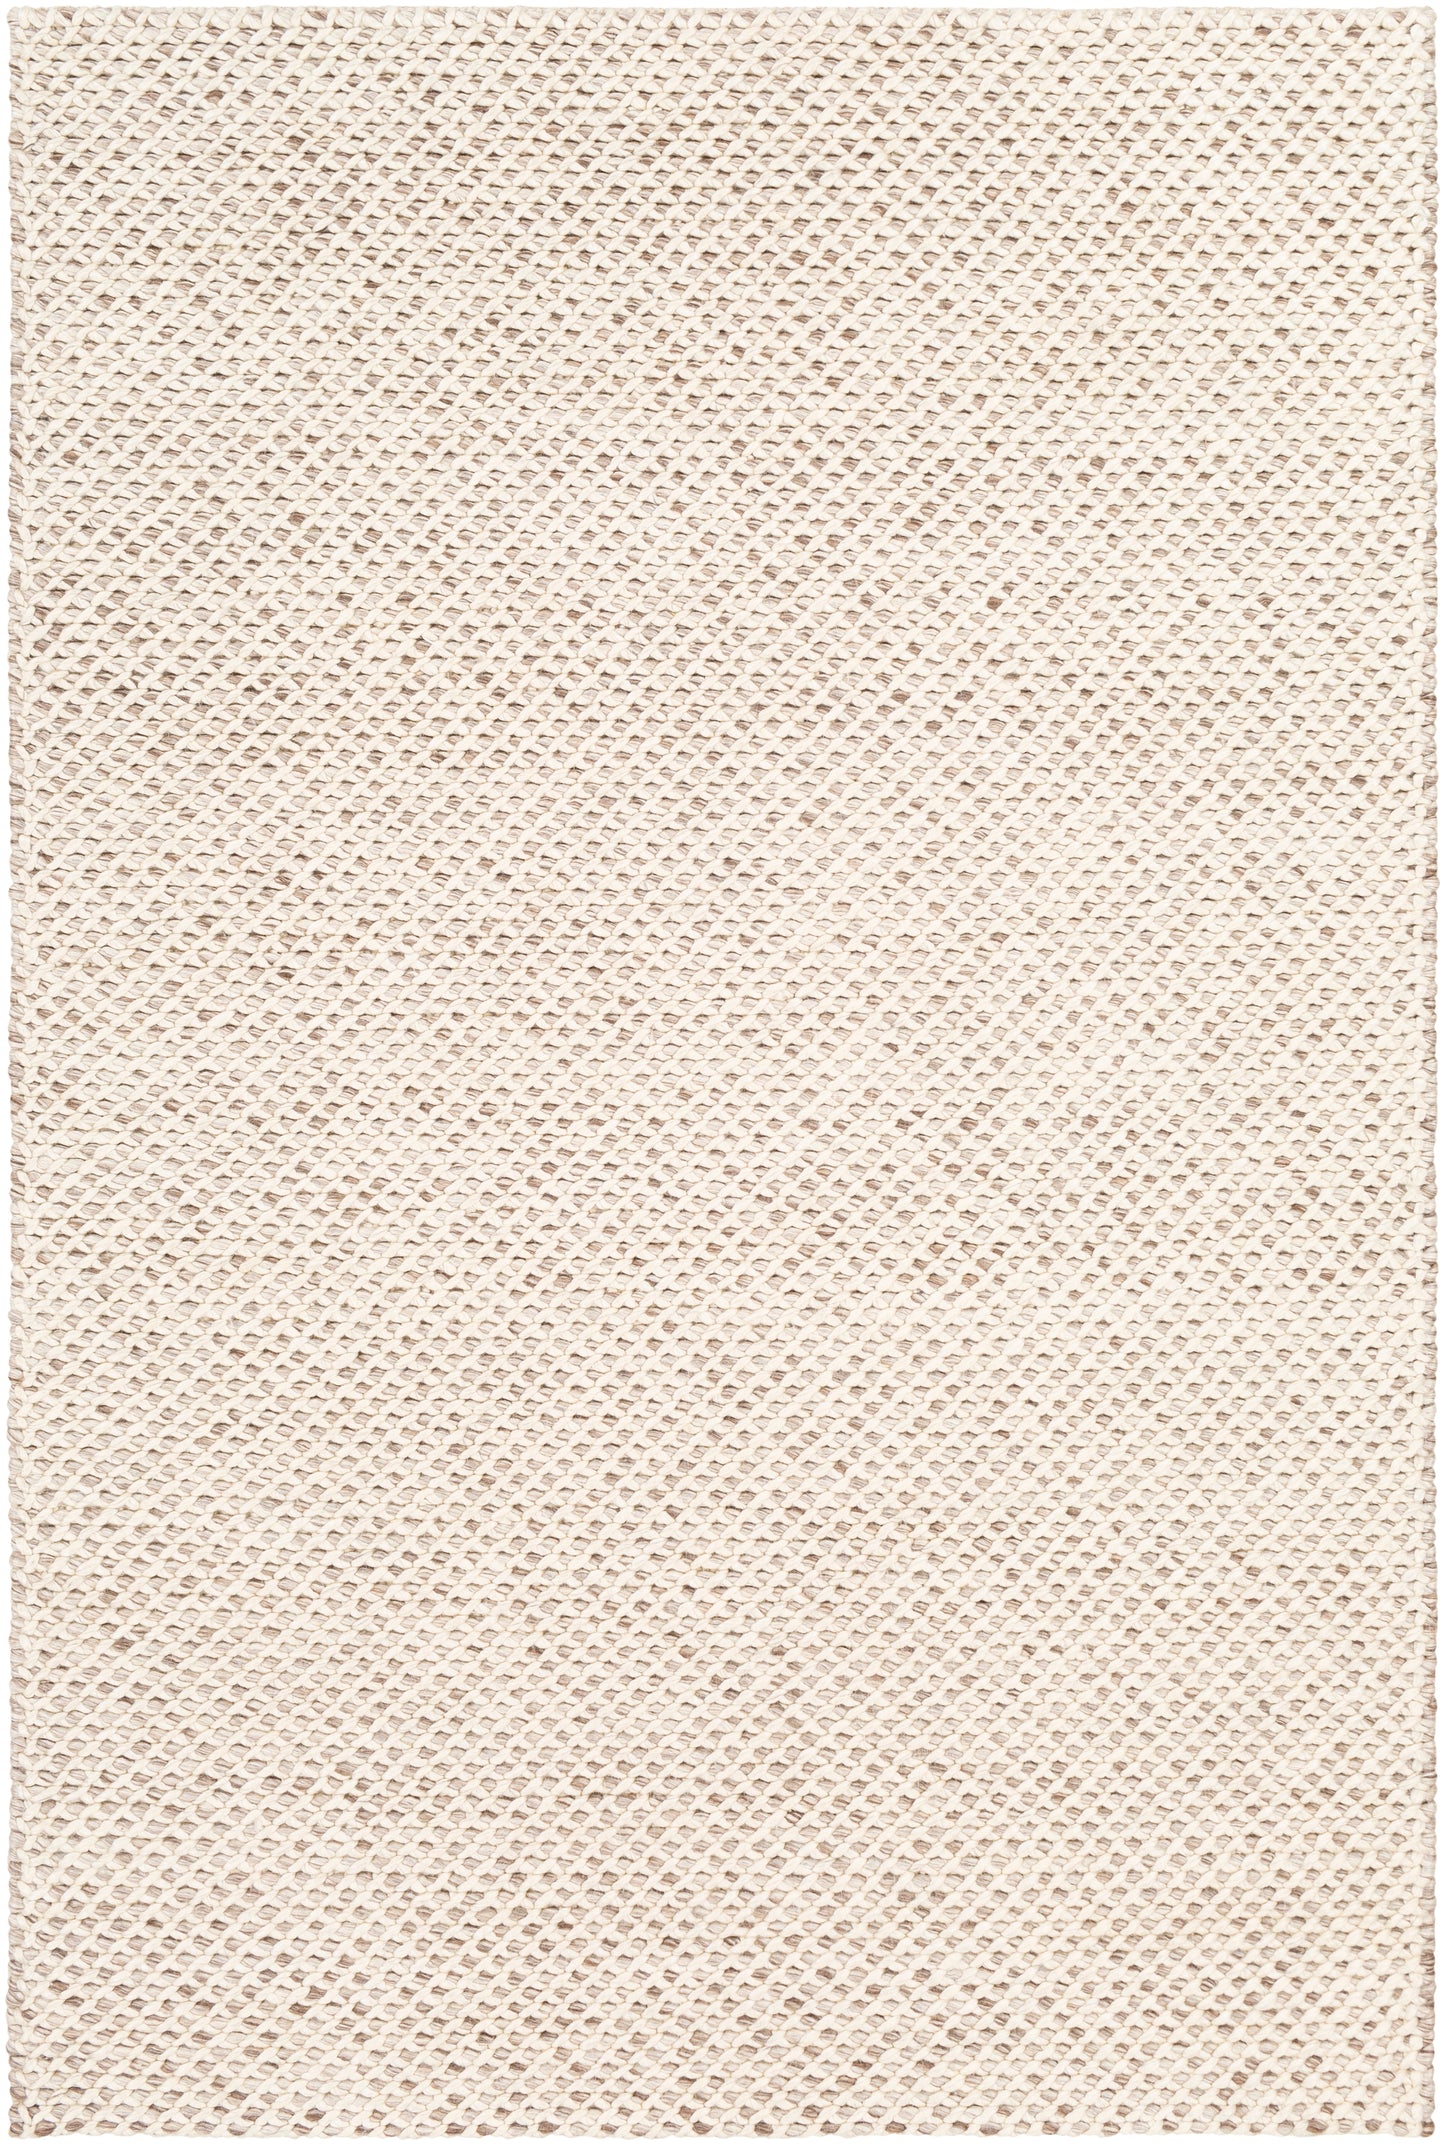 Telluride 23027 Hand Woven Synthetic Blend Indoor Area Rug by Surya Rugs